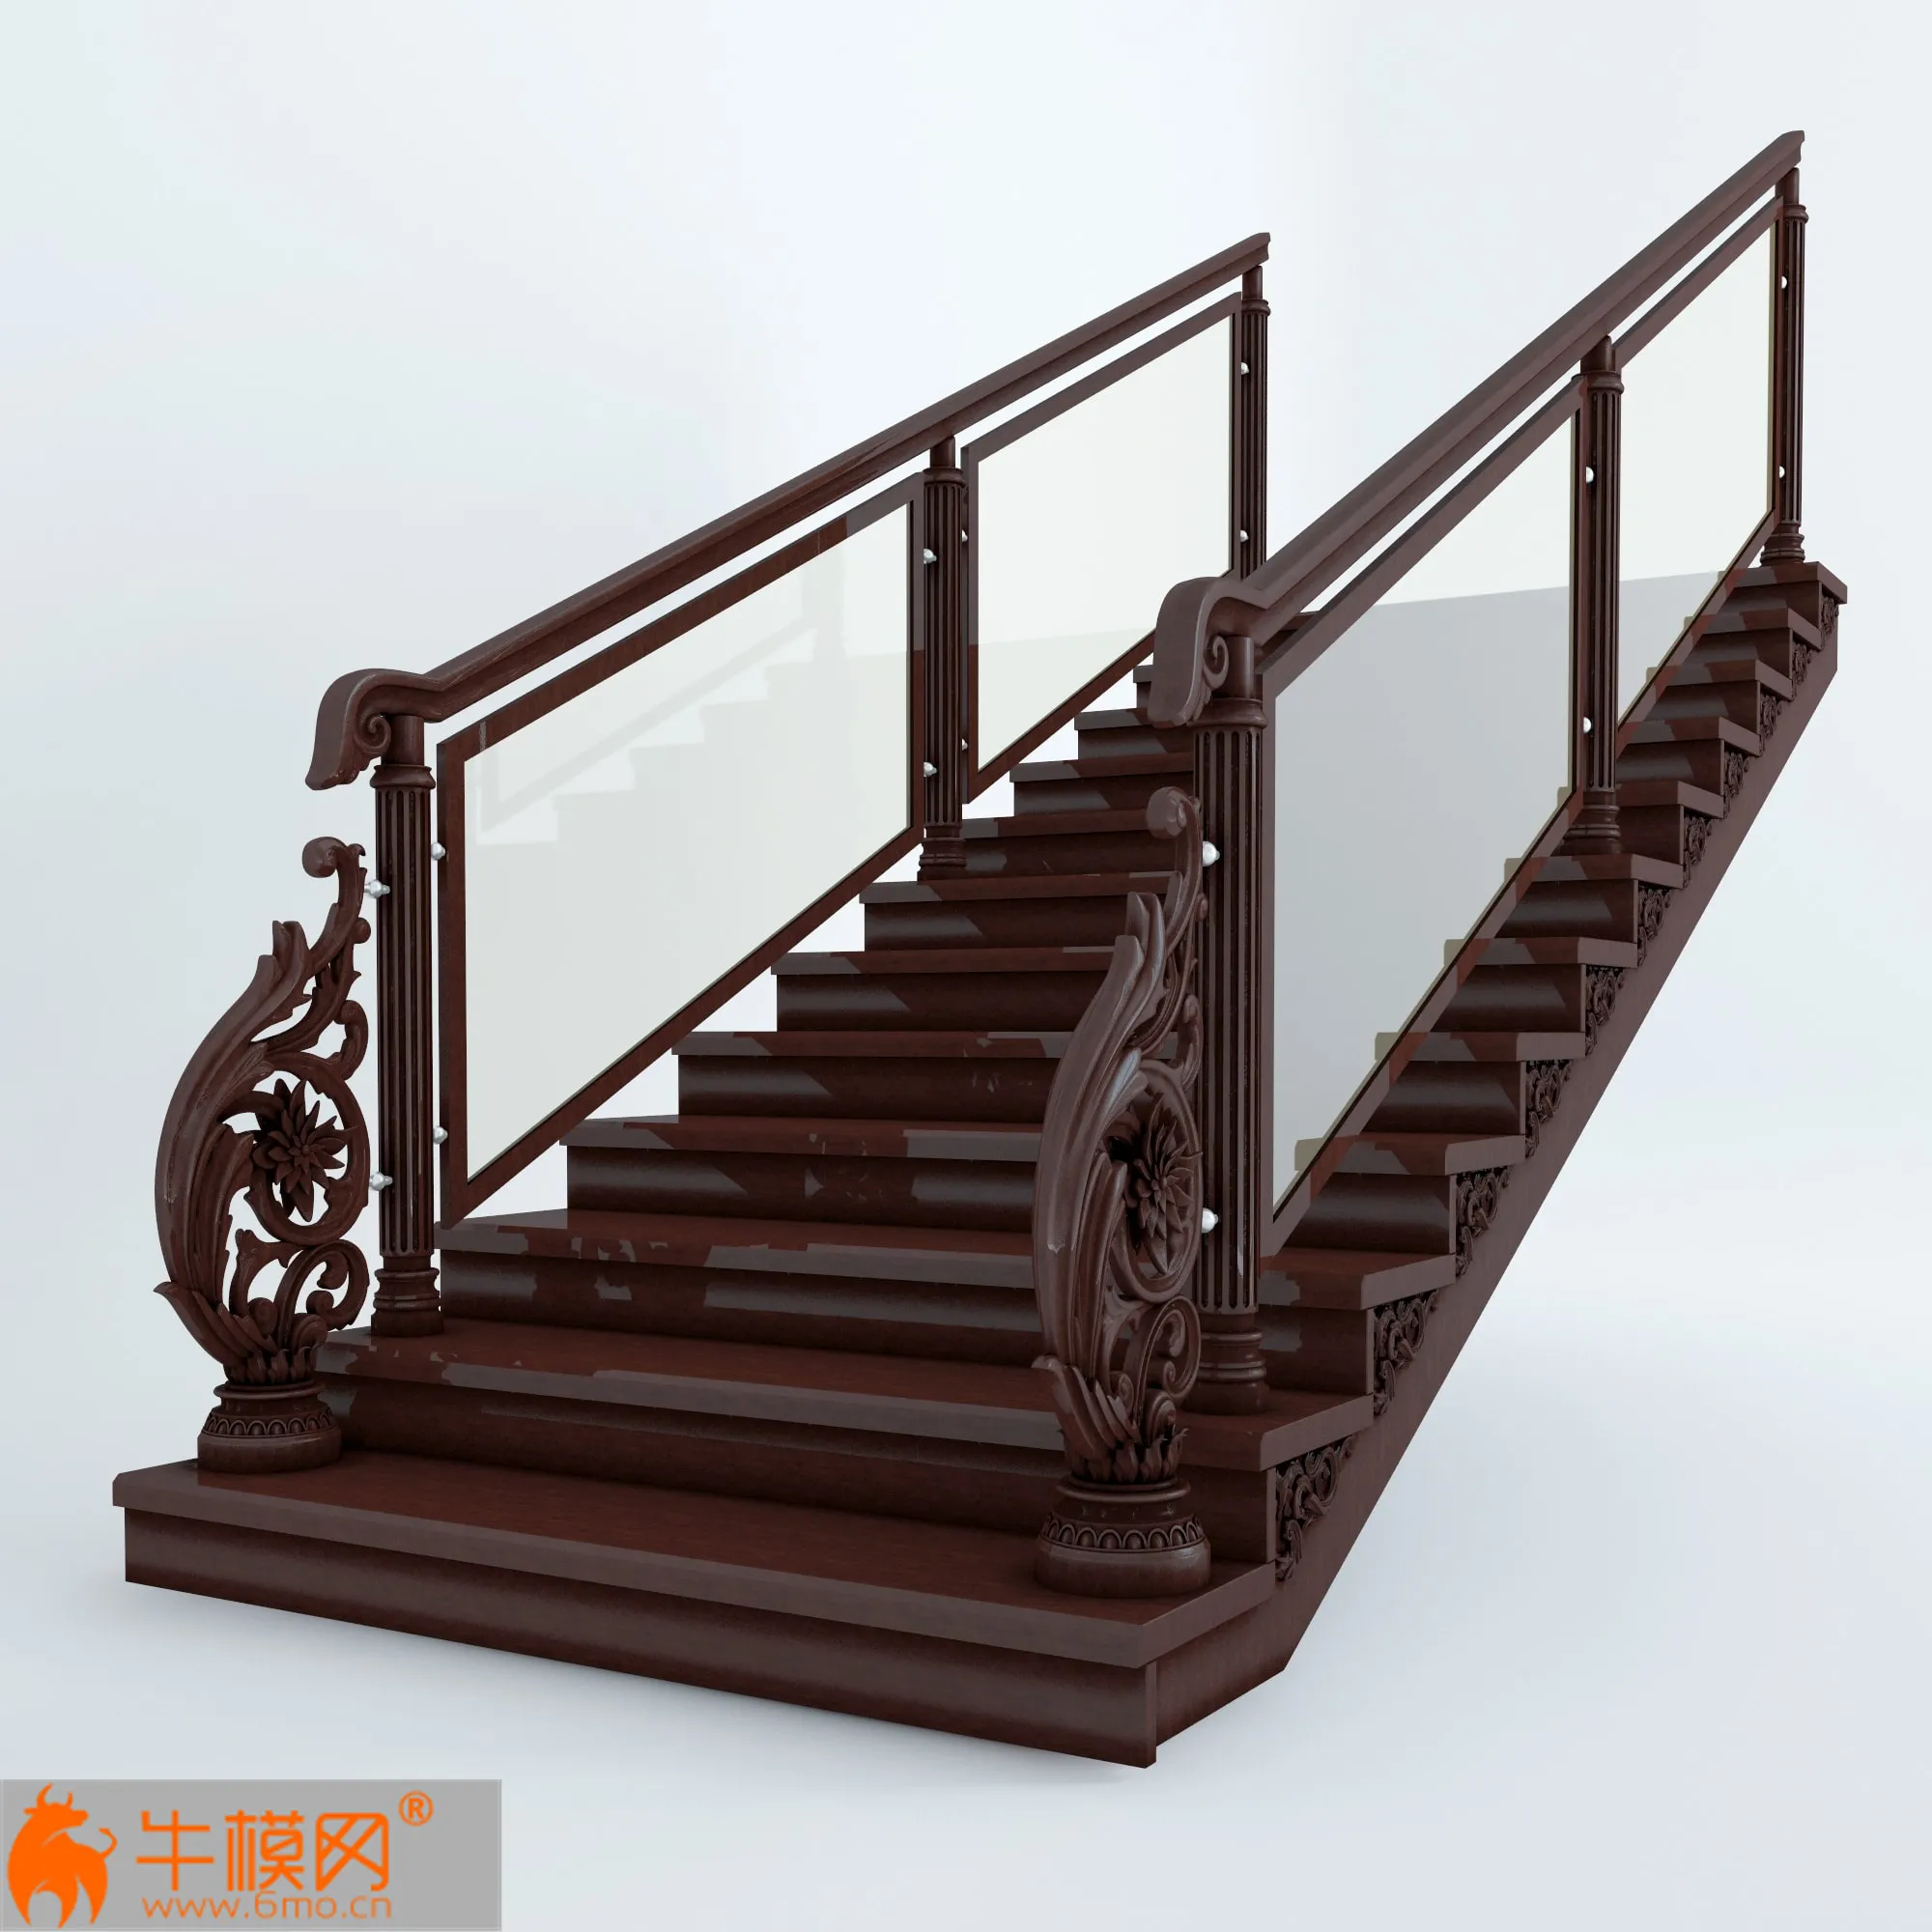 Stairs 2525 – 2920